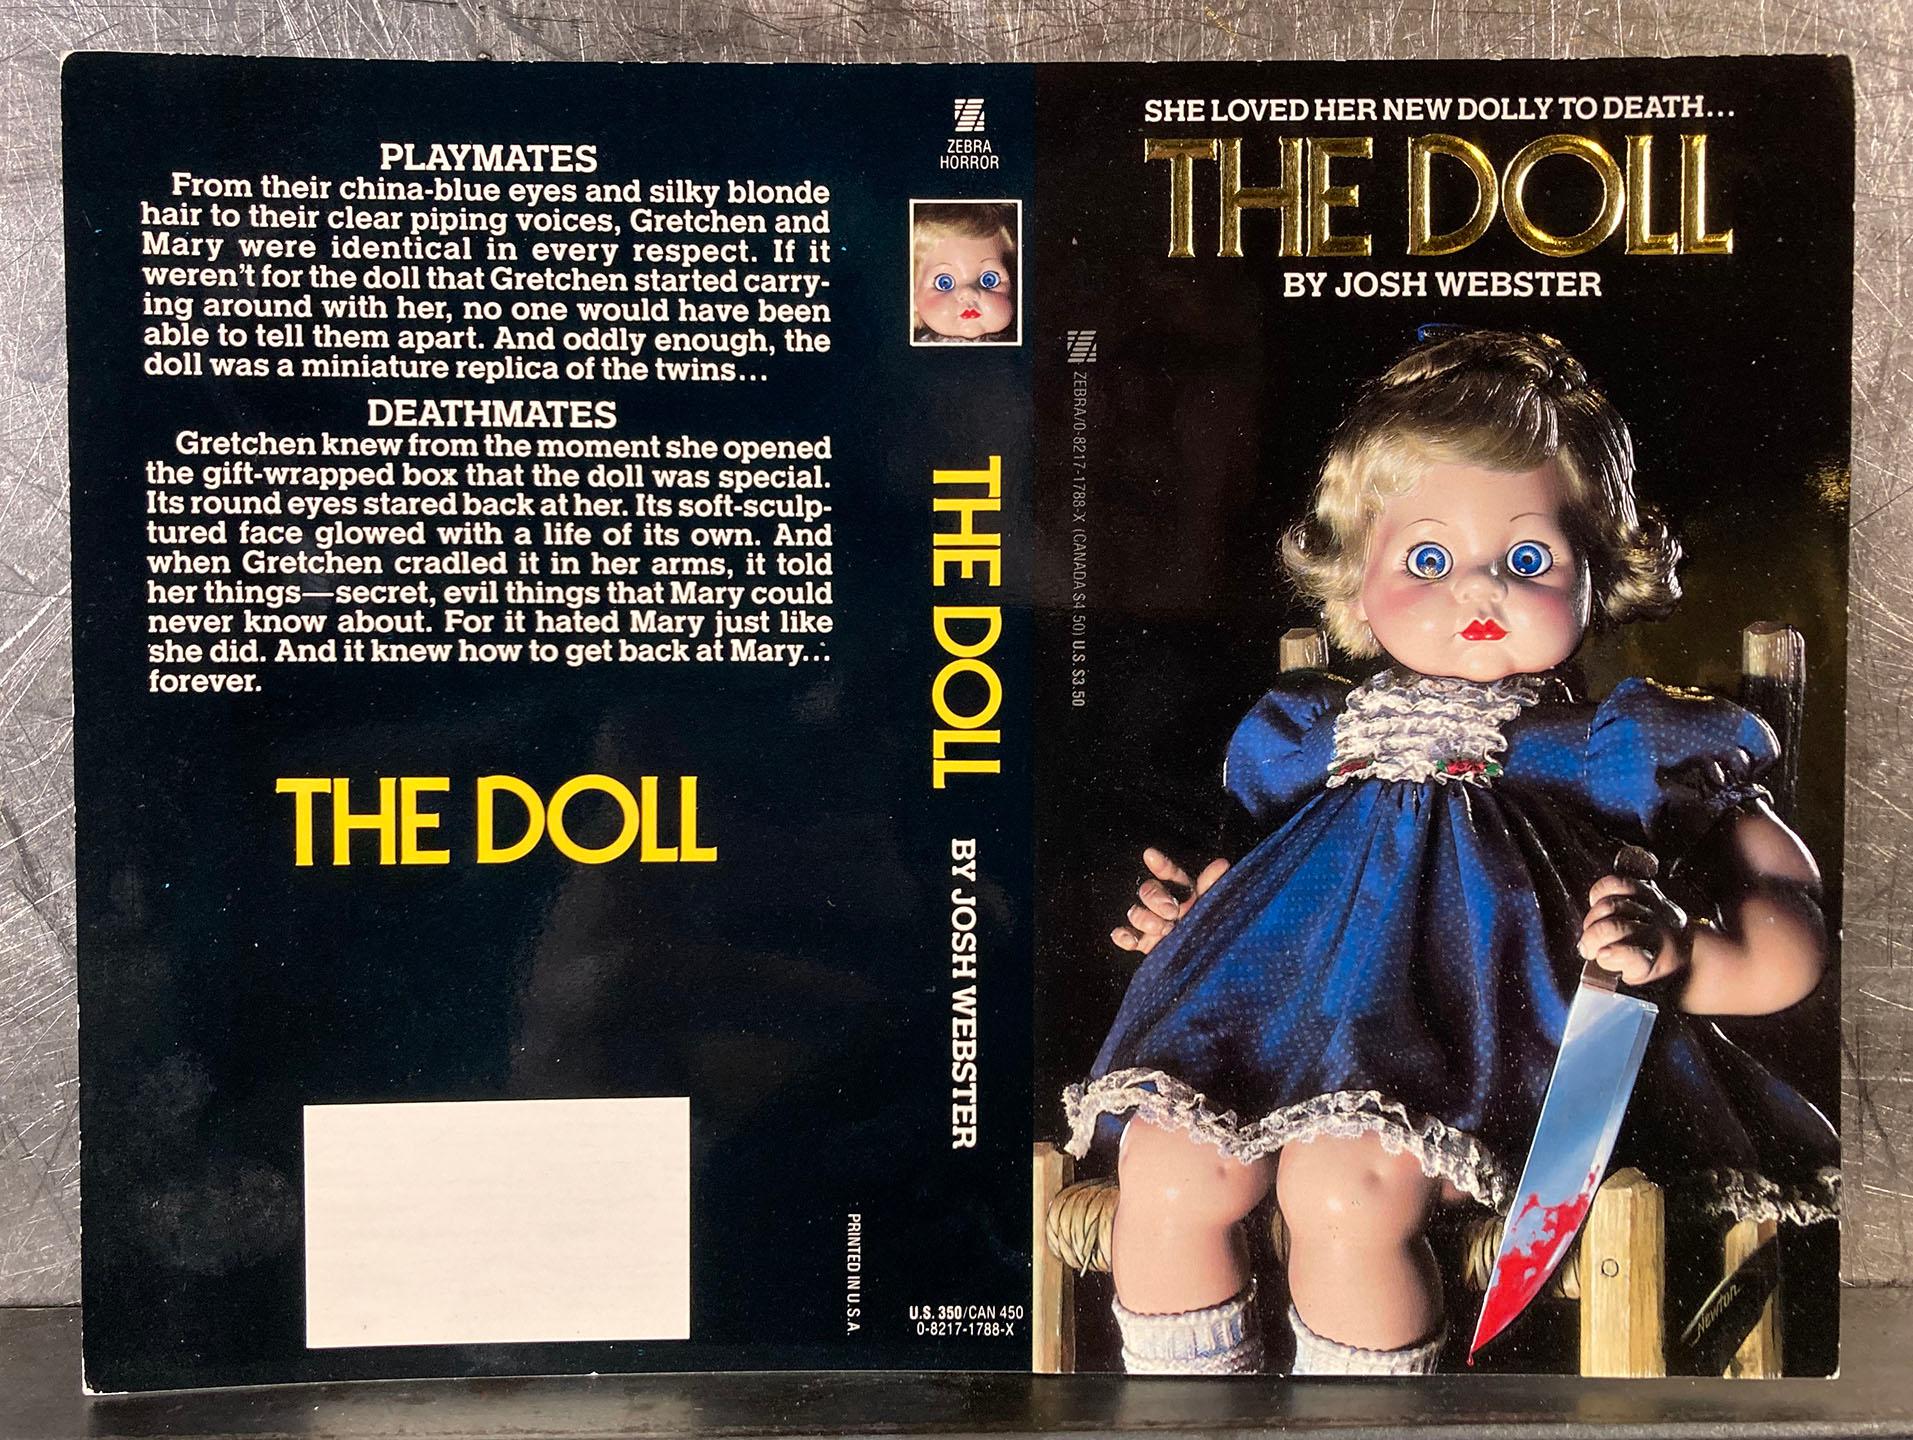 Doll Mixed Media Painting and Original Book Cover In New Condition For Sale In Montreal, QC